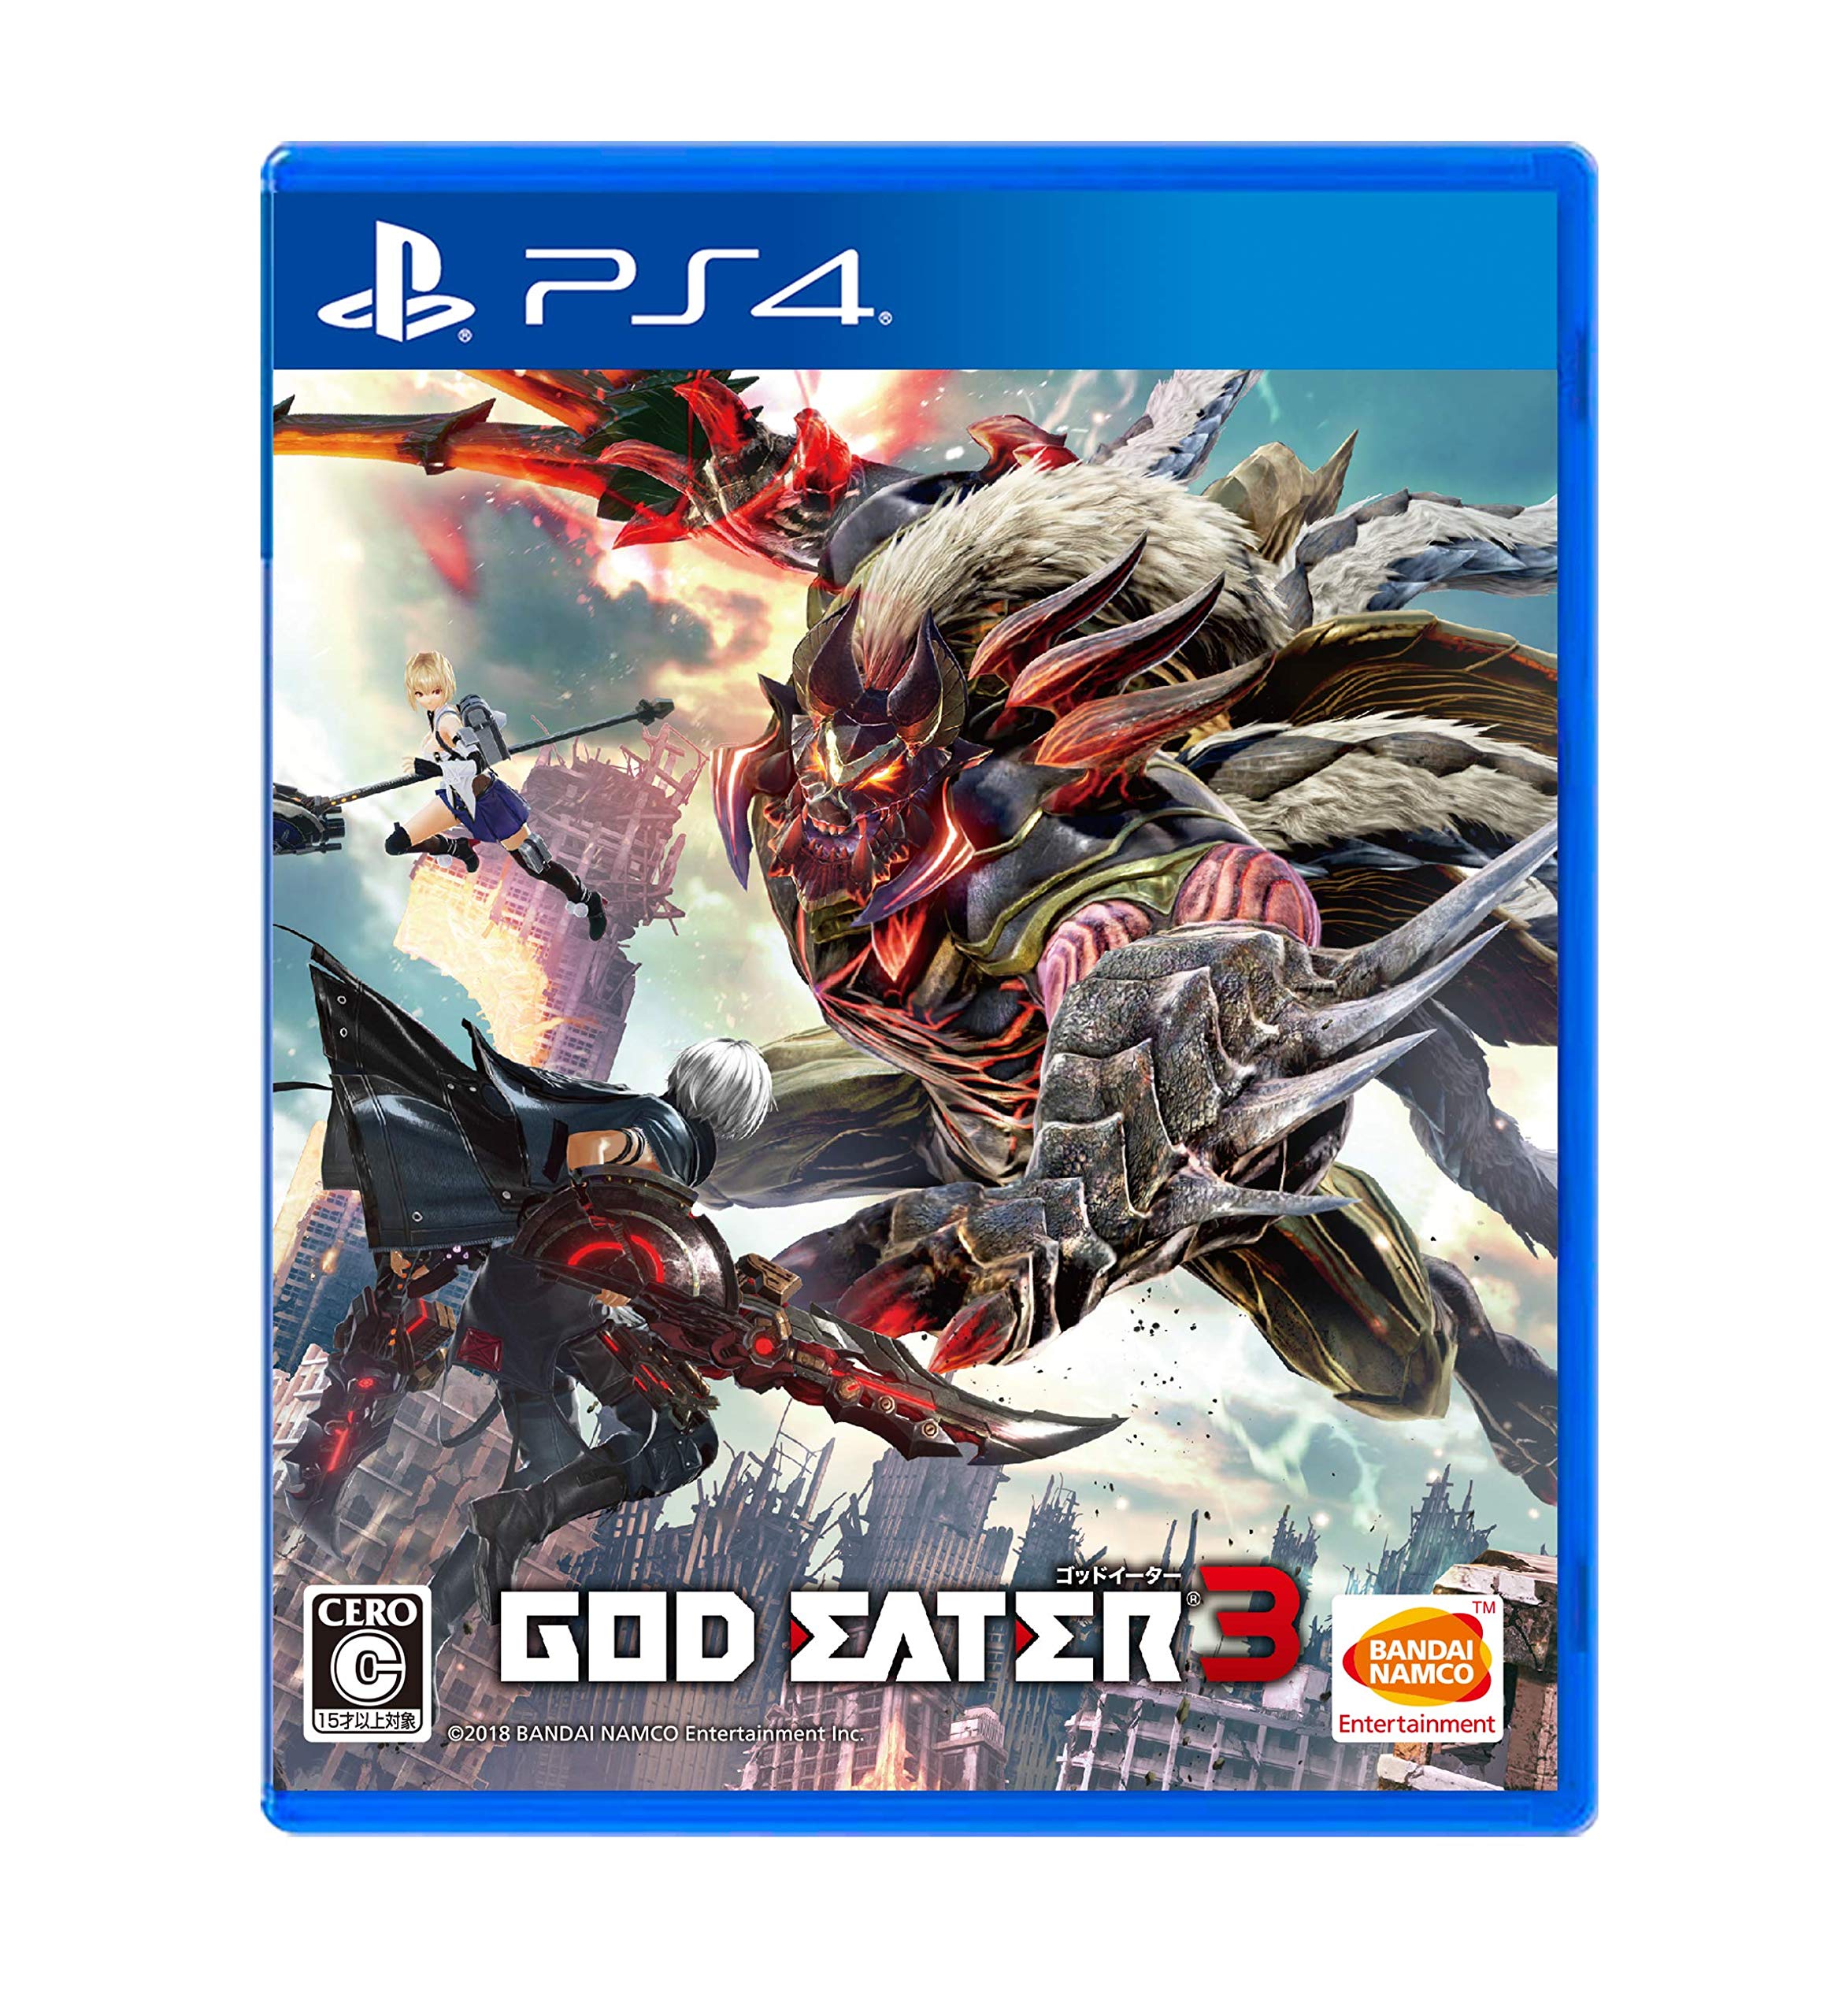 God Eater 3 Switch Version Demo Live Now; PS4/PC Get Code Vein Costumes